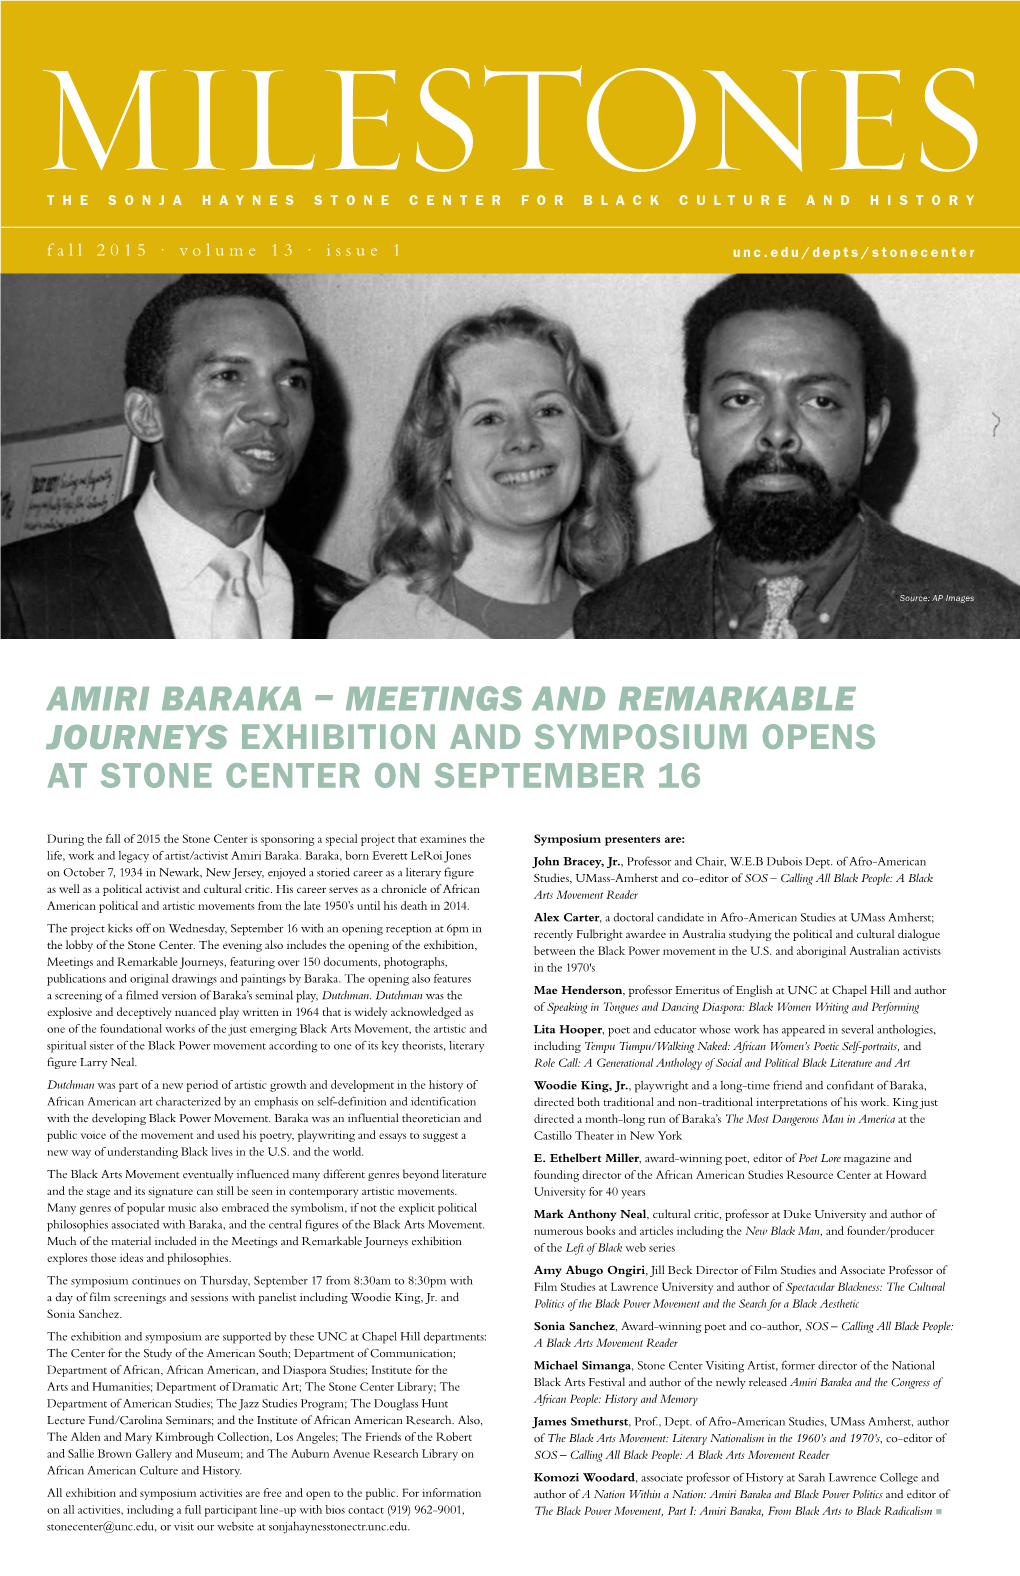 Amiri Baraka – Meetings and Remarkable Journeys Exhibition and Symposium Opens at Stone Center on September 16